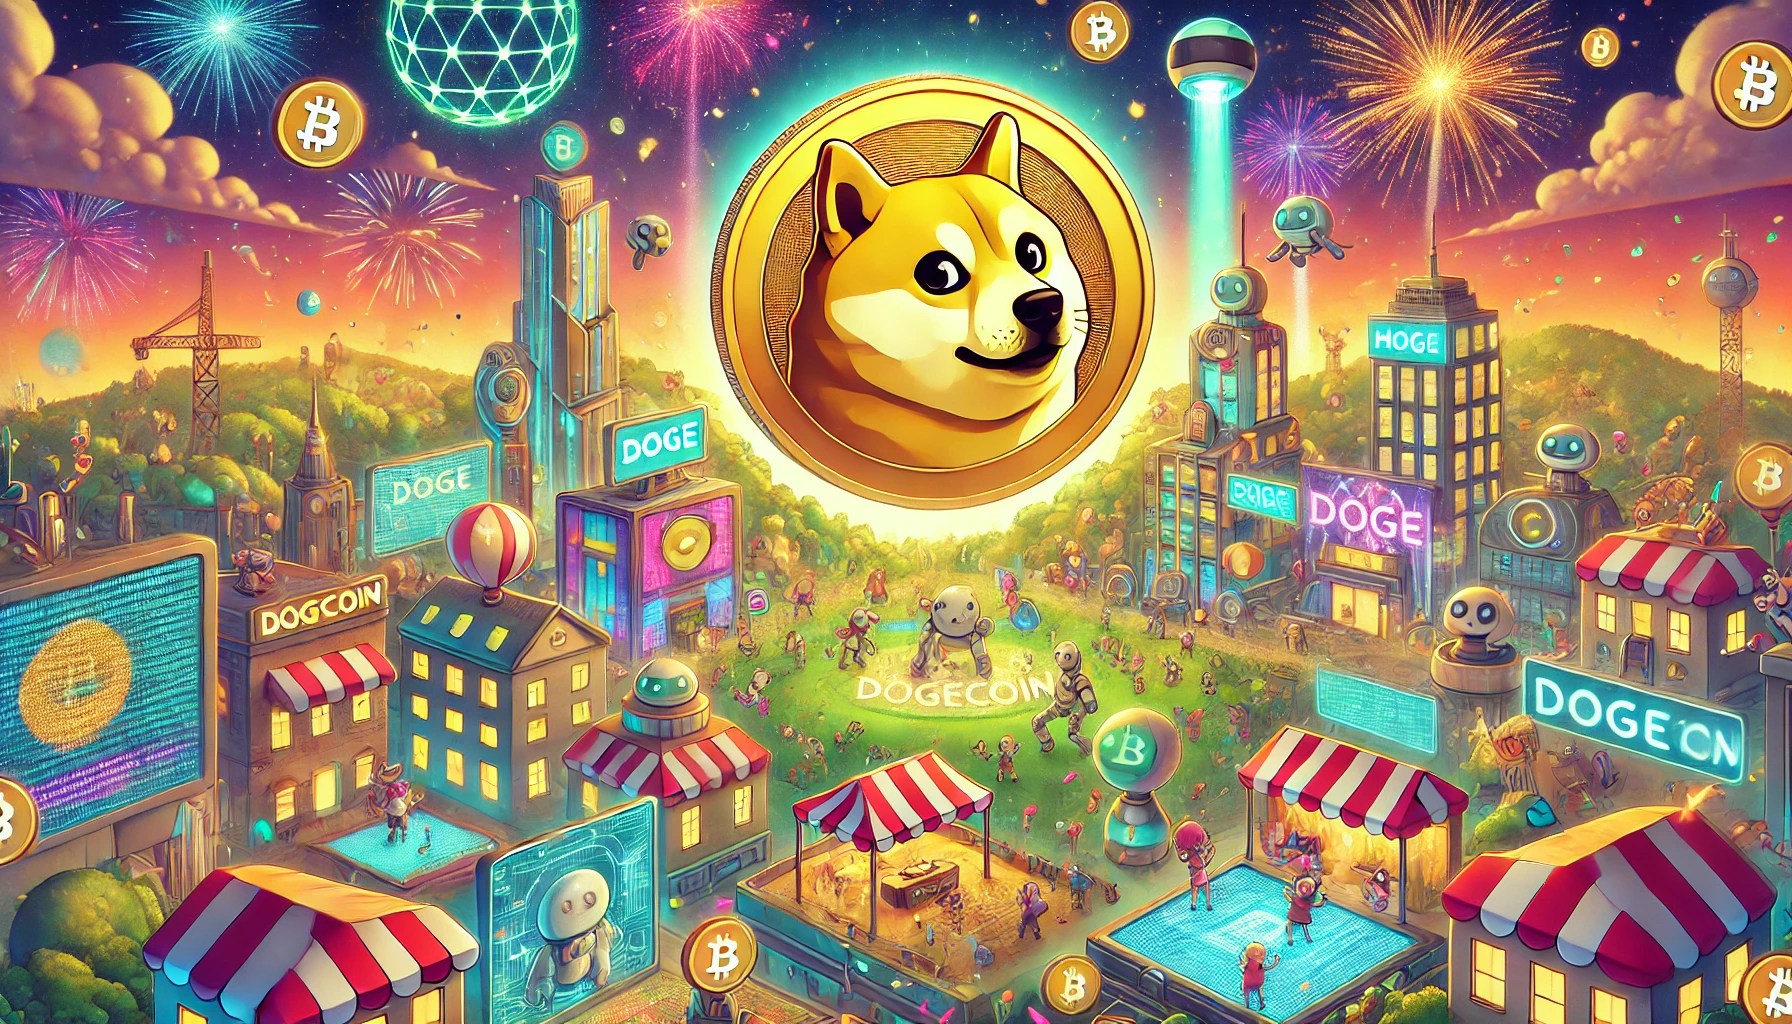 Beloved Kabosu Owner Gets New Shiba Inu Dog, Is This The Next Dogecoin?